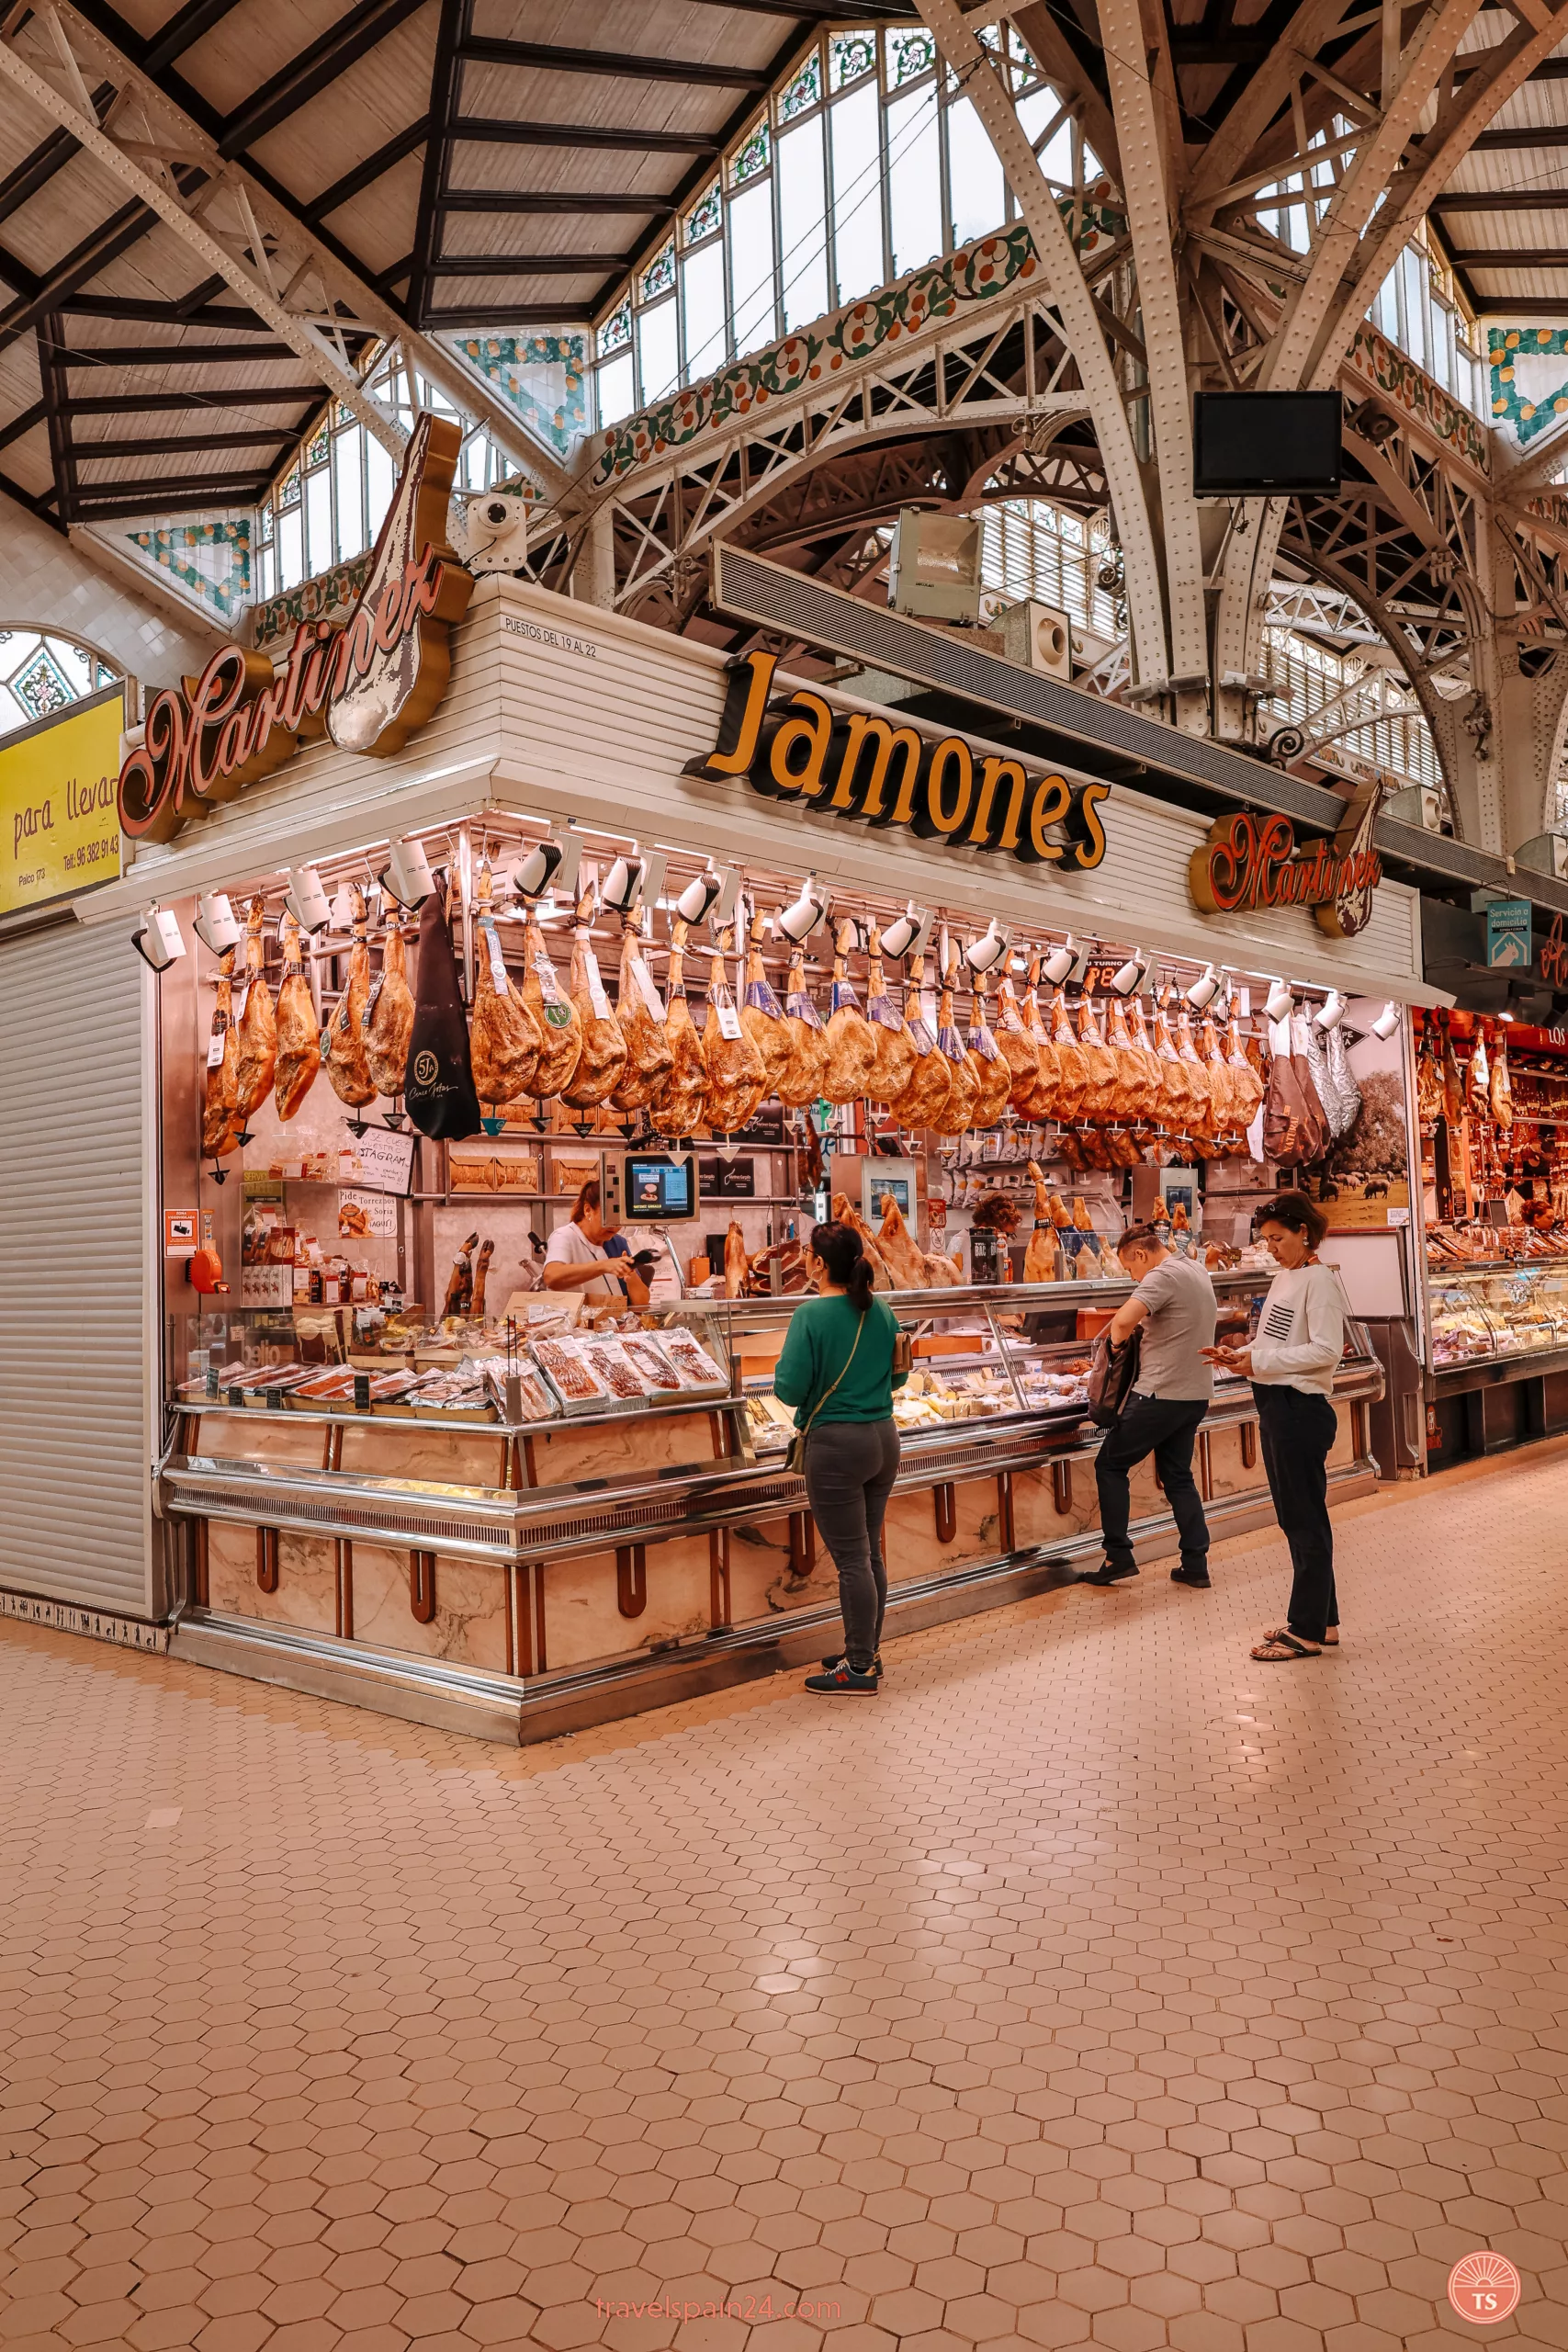 Traditional Spanish jamon varieties hanging in a row at Valencia market